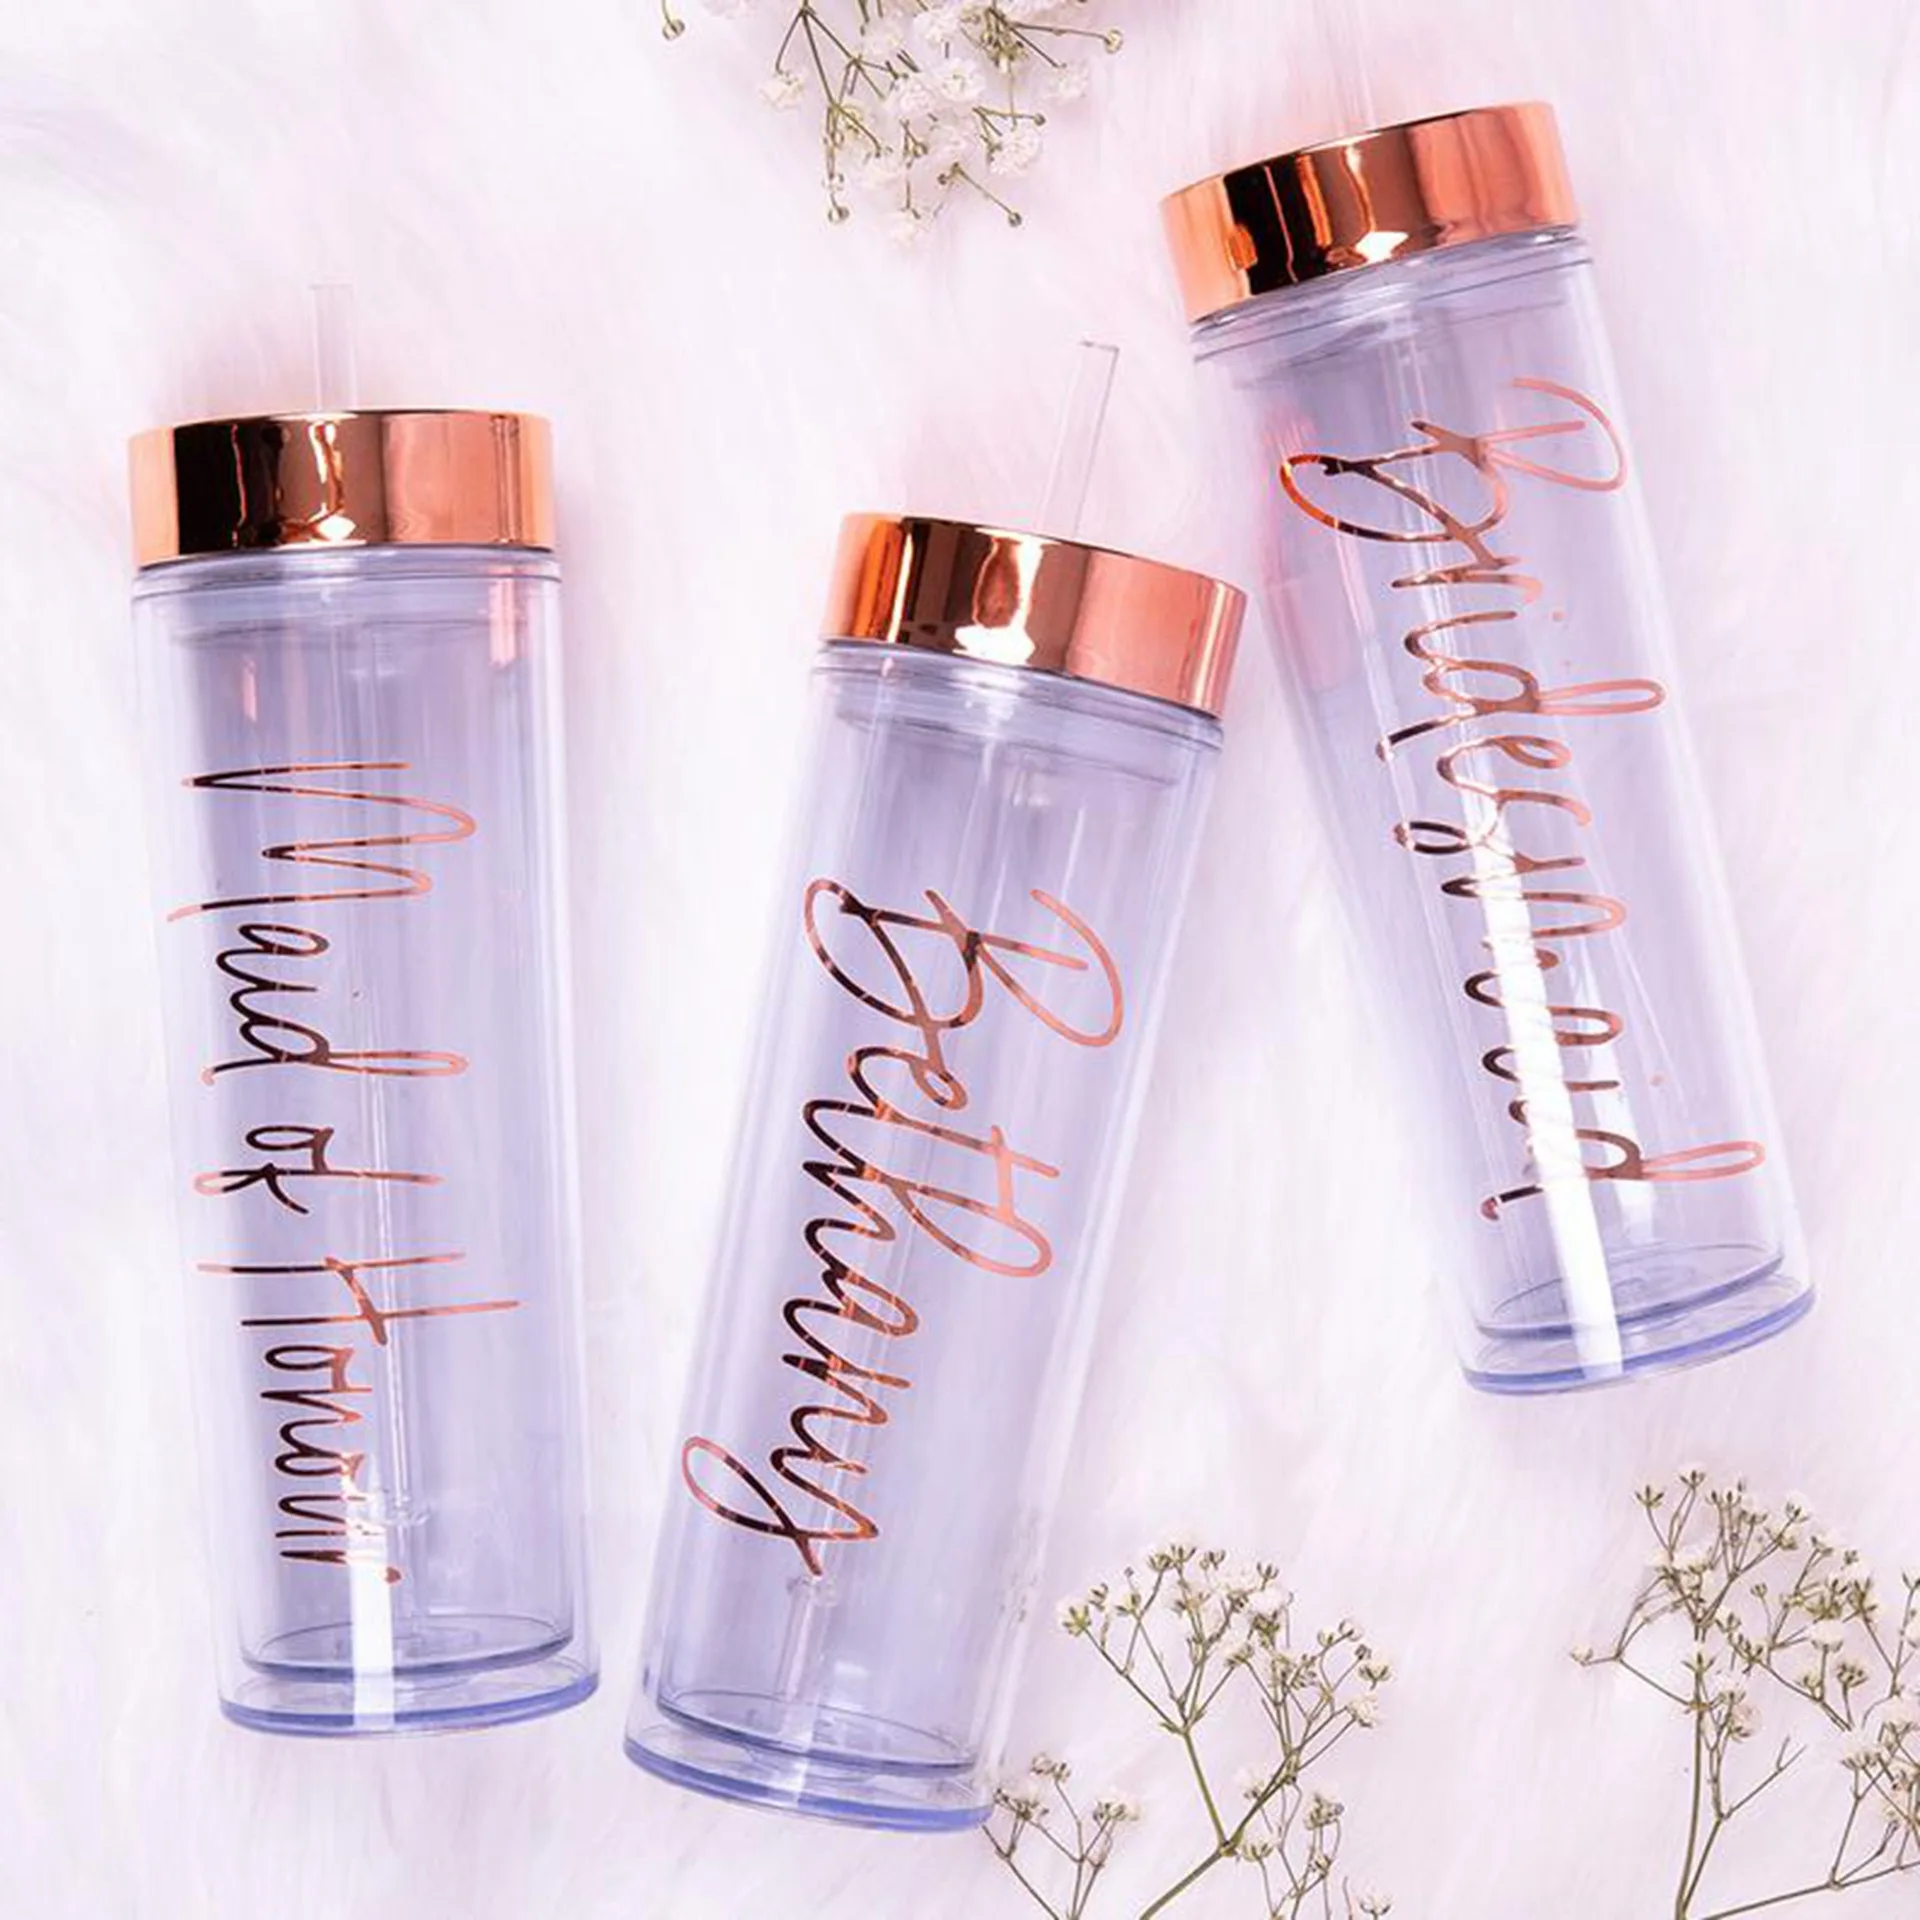 

Skinny Tumbler 16oz Clear Double Wall Acrylic Tumblers With Straw and Metallic Rose Gold Lids Personalized Party Skinny Tumbler, Clear color body with colored lid